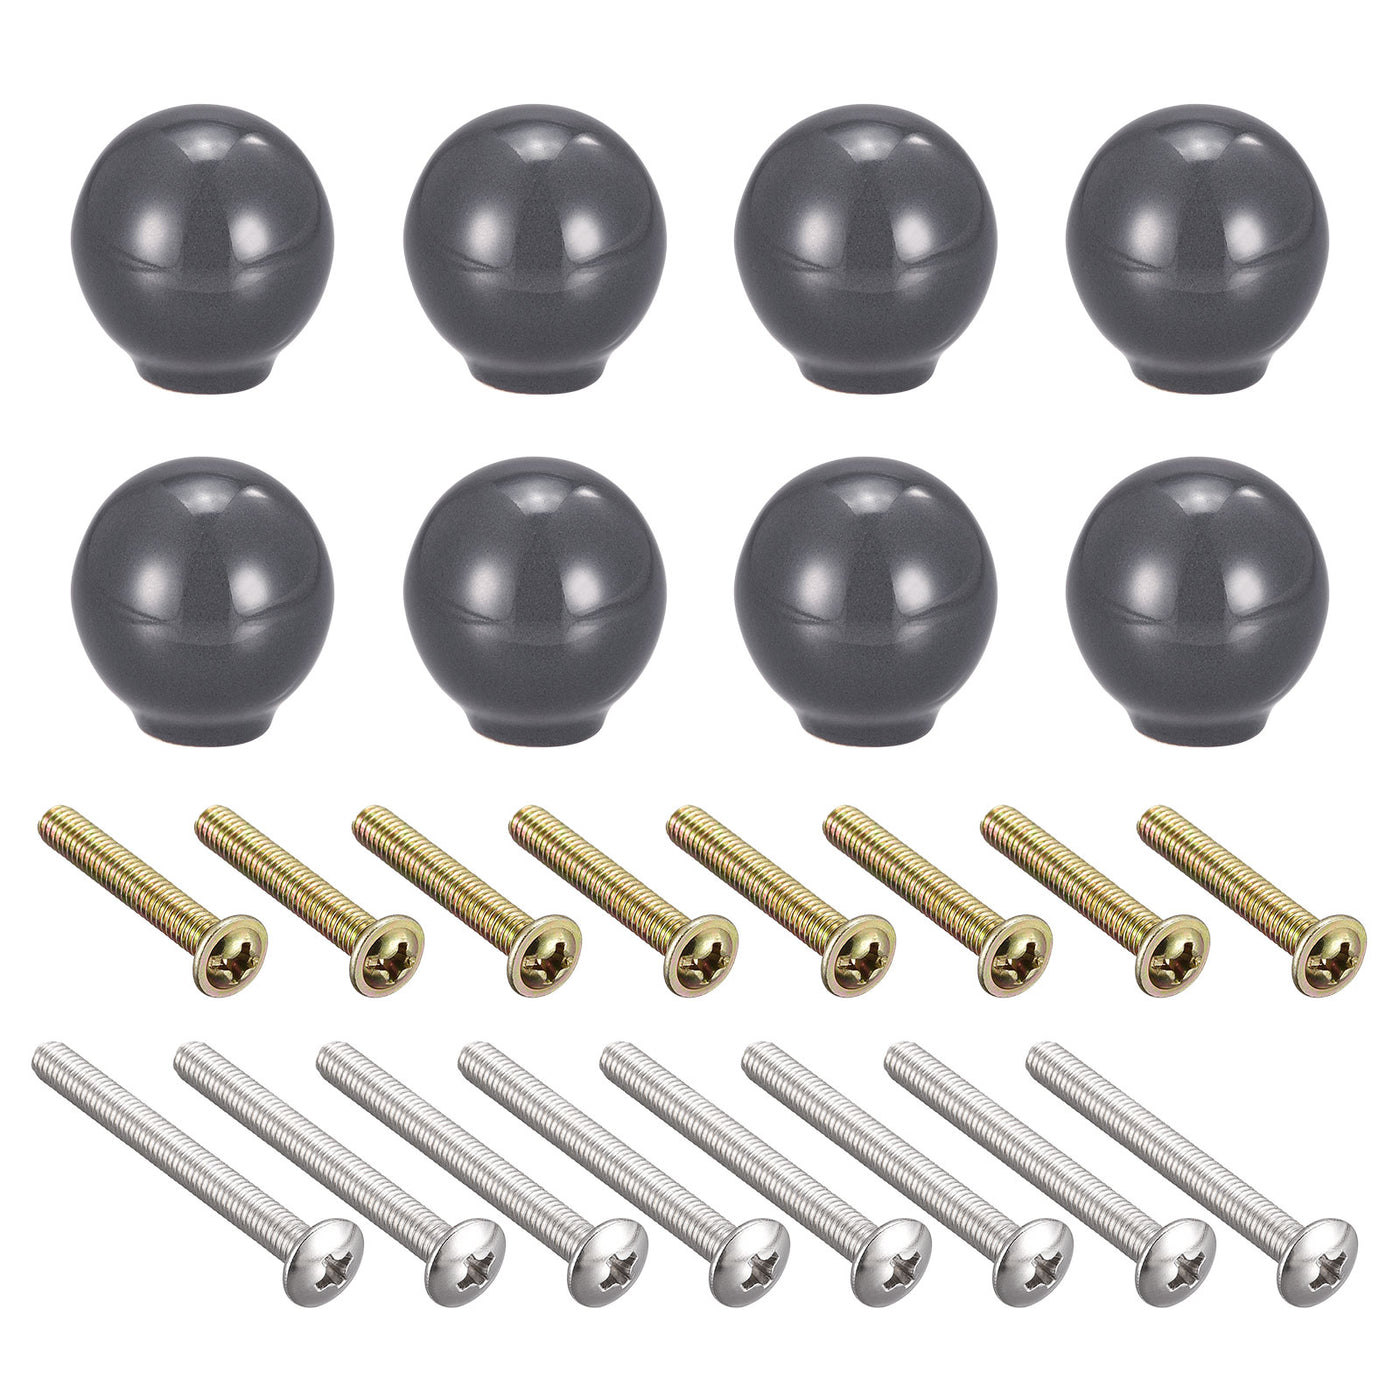 Uxcell Uxcell 33x35mm Ceramic Drawer Knobs, 8pcs Ball Shape Door Pull Handles Gray